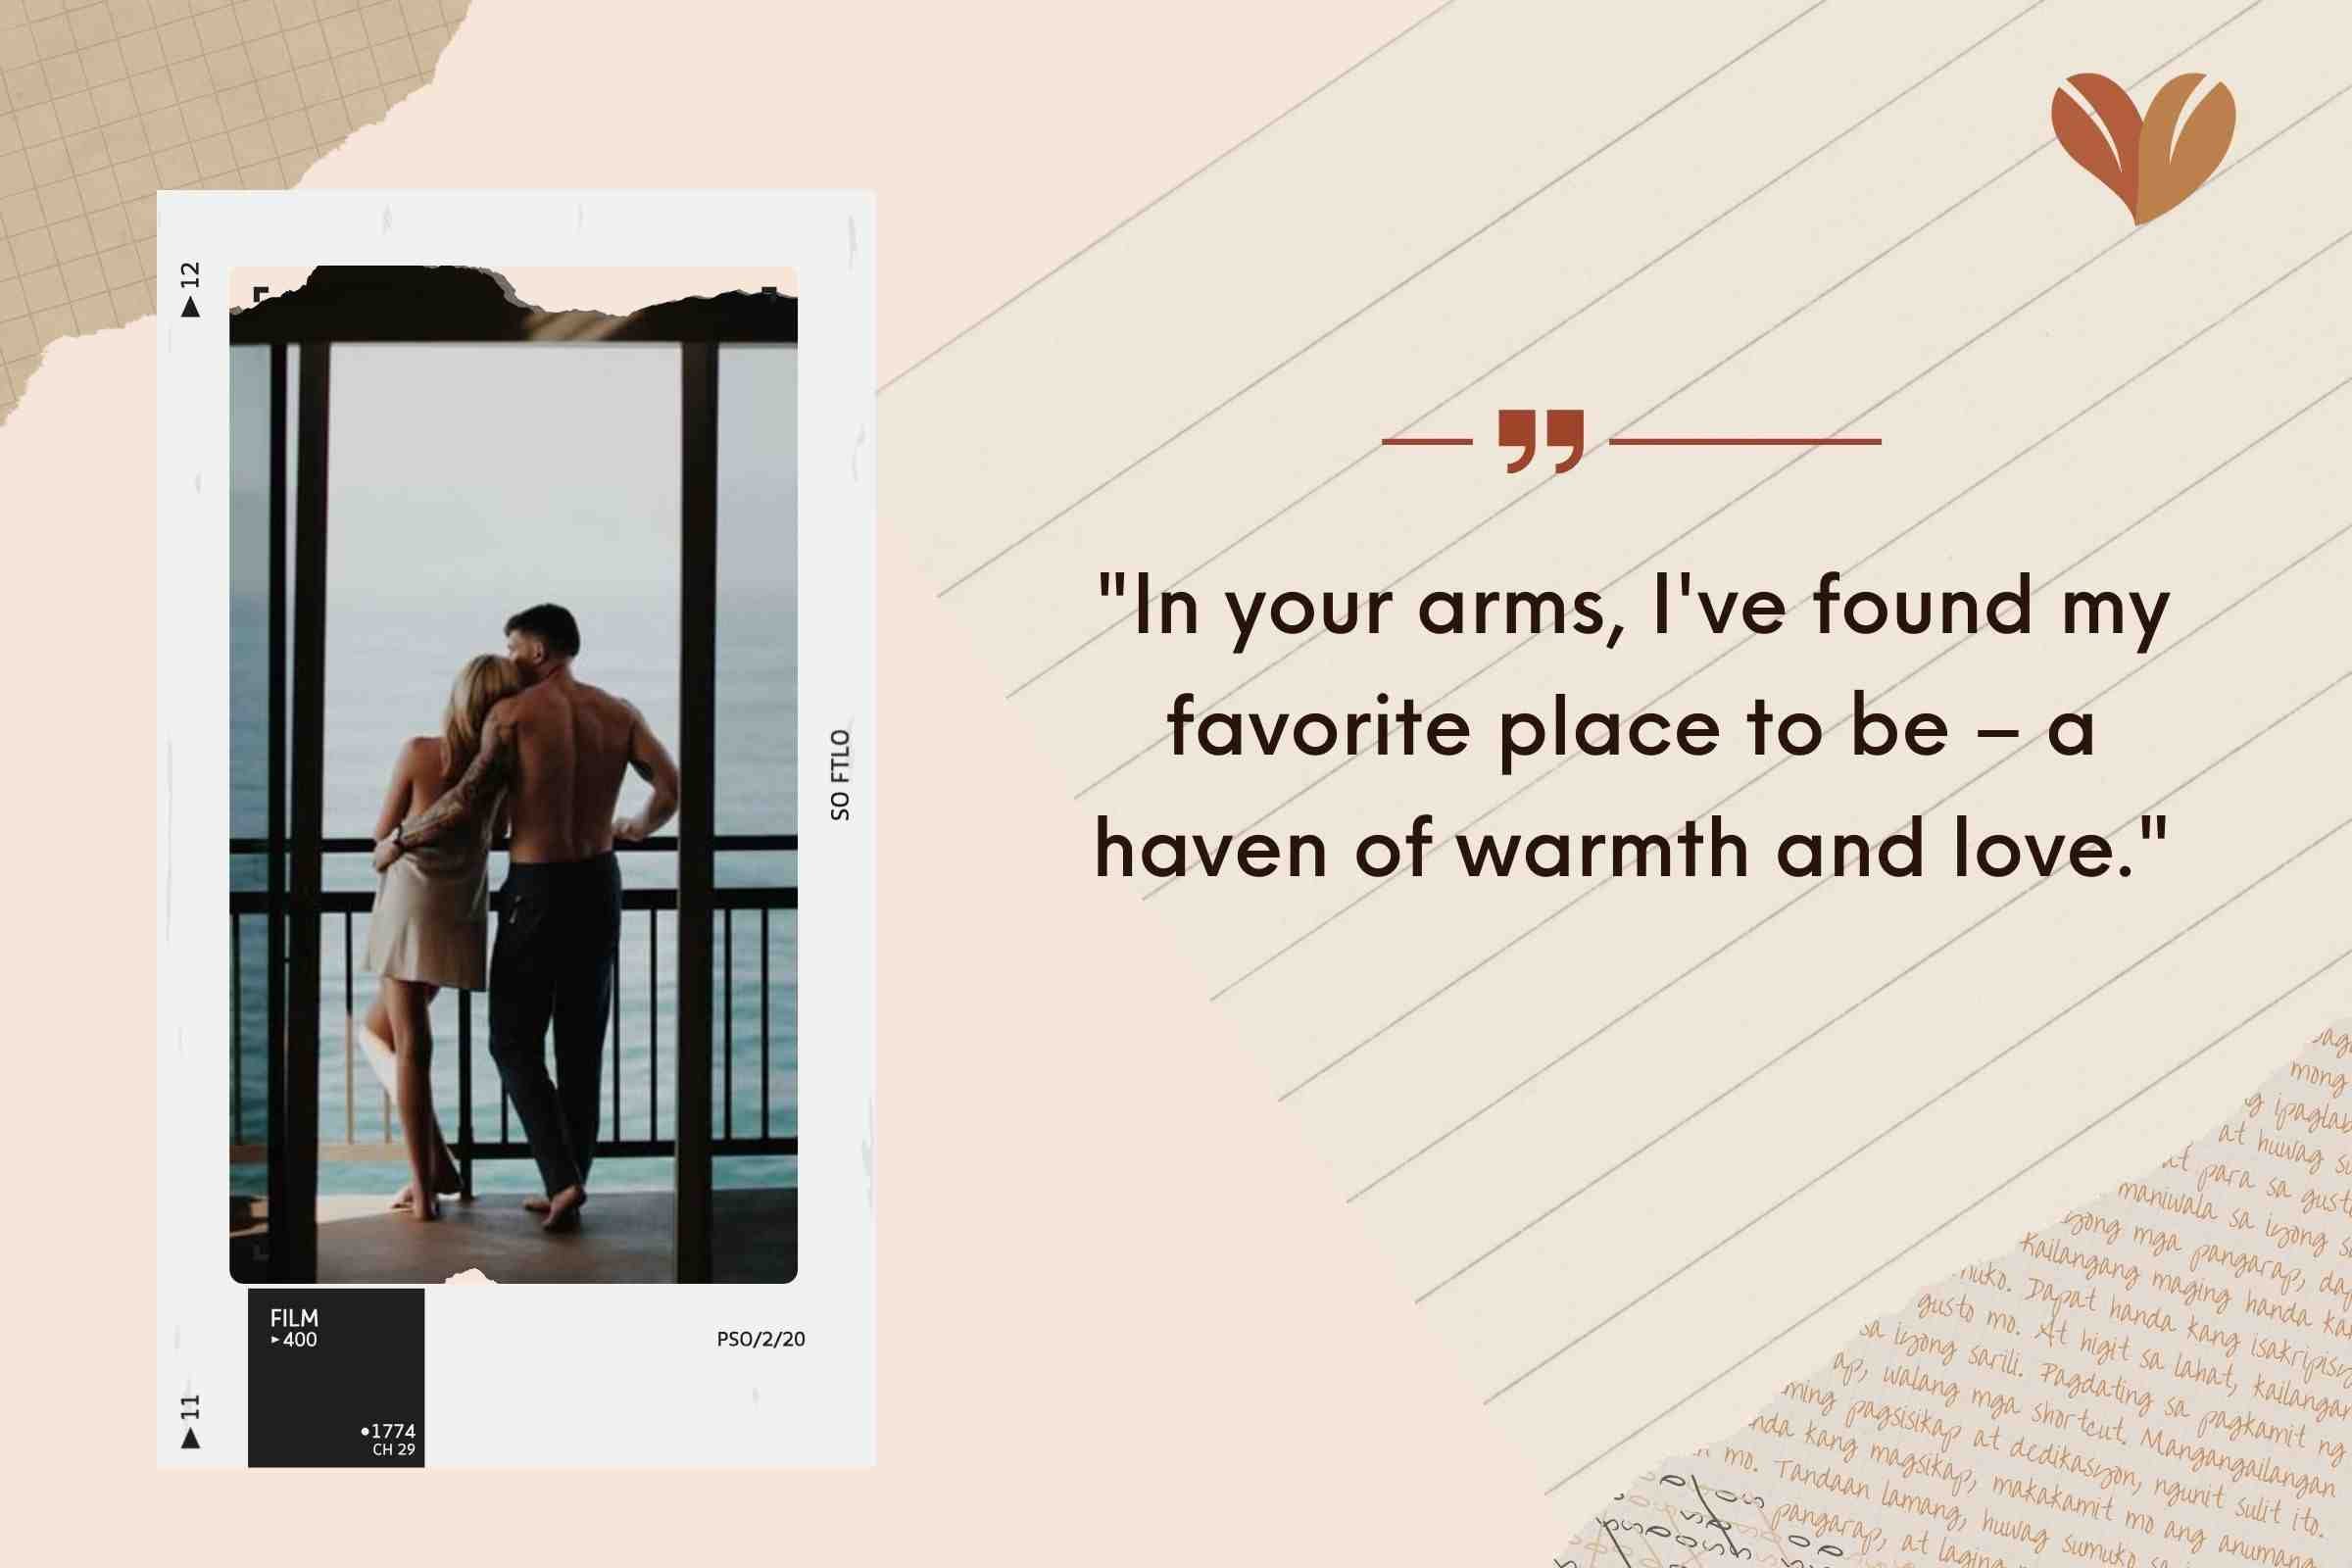 "In your arms, I've found my favorite place to be – a haven of warmth and love."